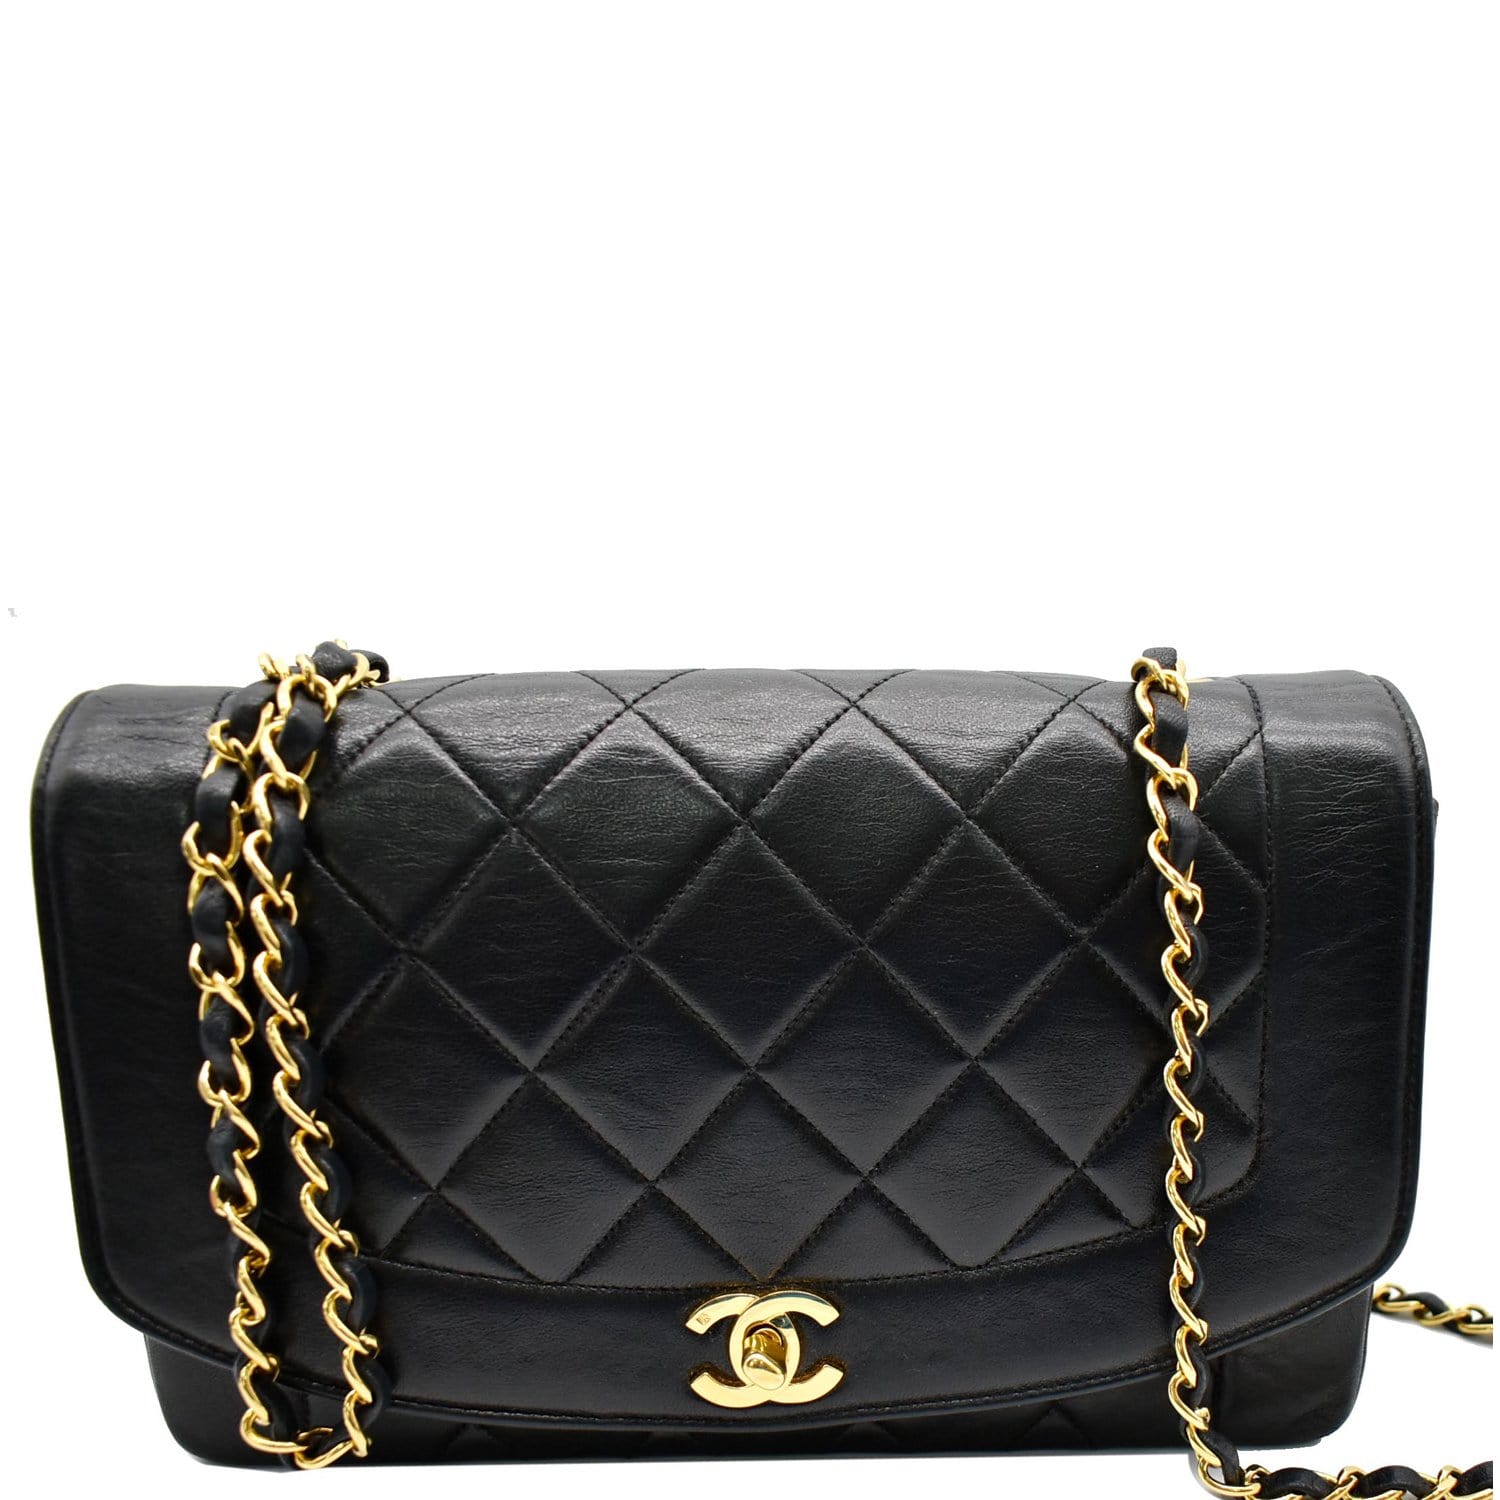 CHANEL CHANEL Diana Flap Matelasse Chain Shoulder Bag Lamb leather Black  Used Women GHW ｜Product Code：2101217468954｜BRAND OFF Online Store